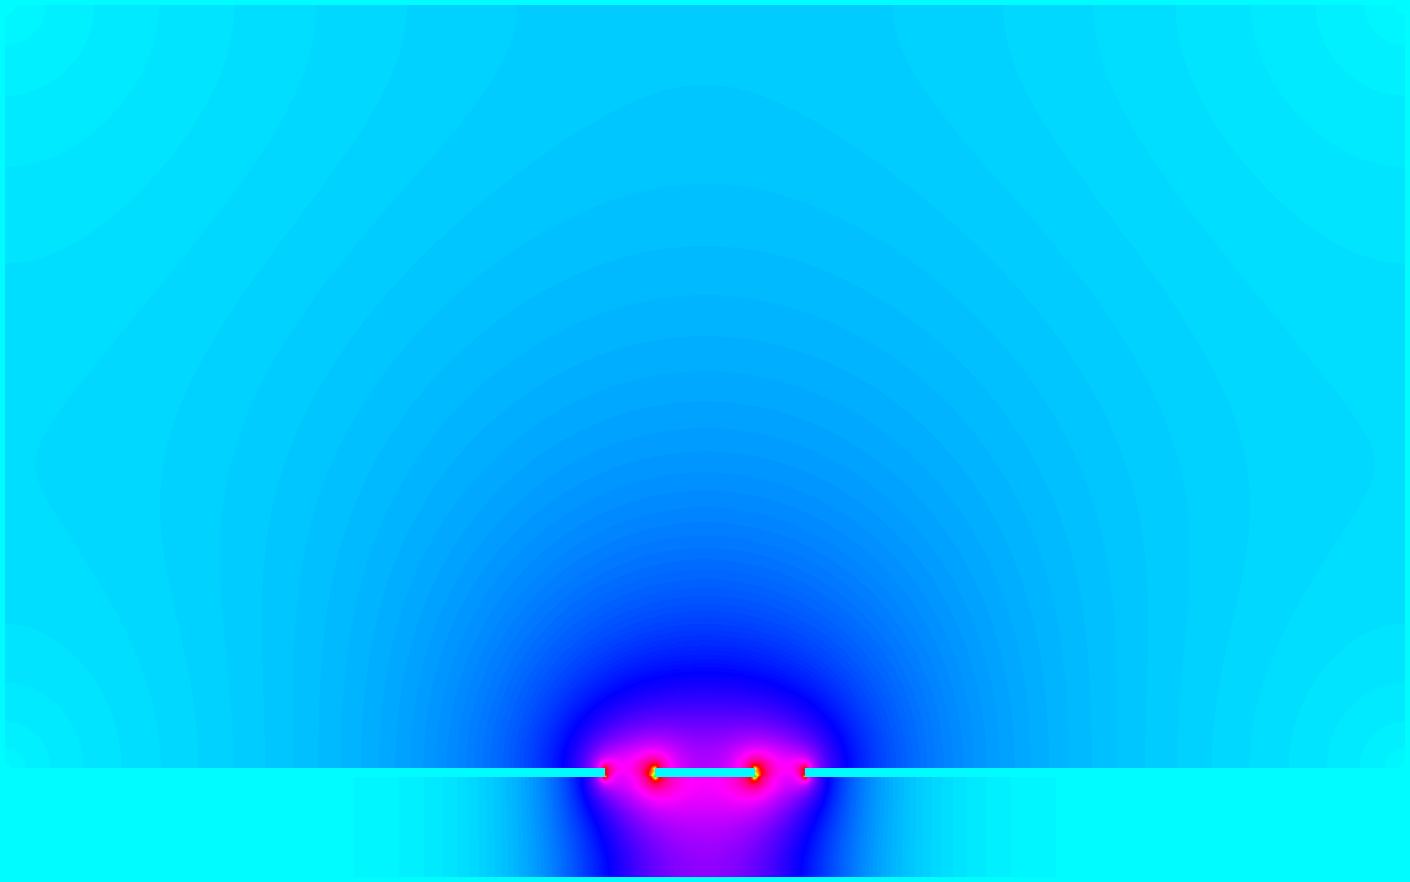 Pseudo color visualization of absolute value of the electric field of a cbcpw